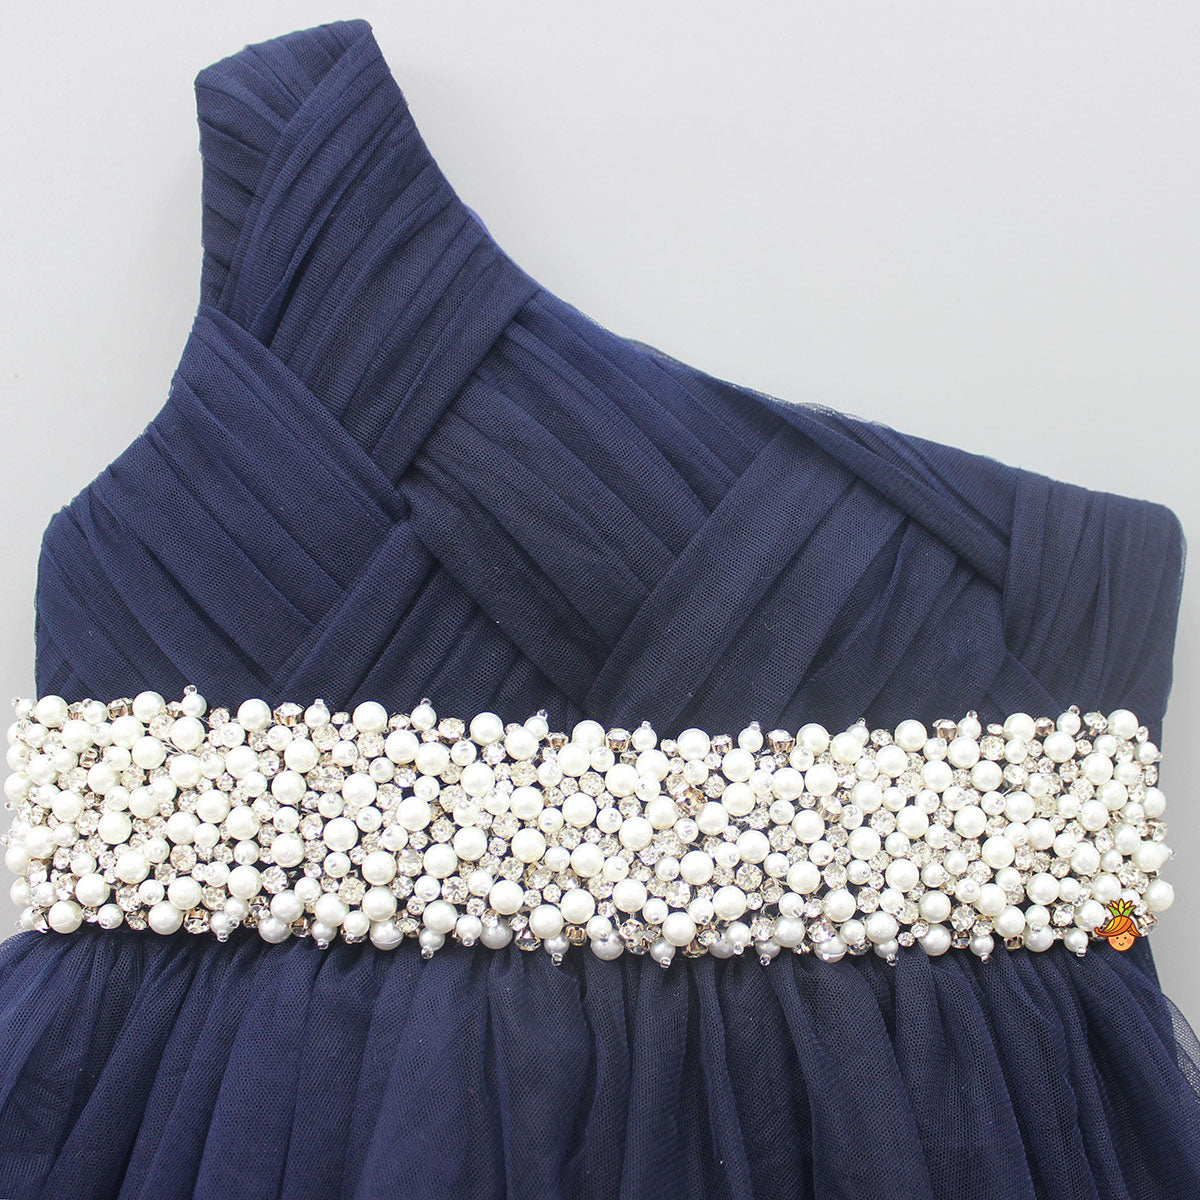 Stunning Pearls And White Stones Embellished Navy Blue Gown